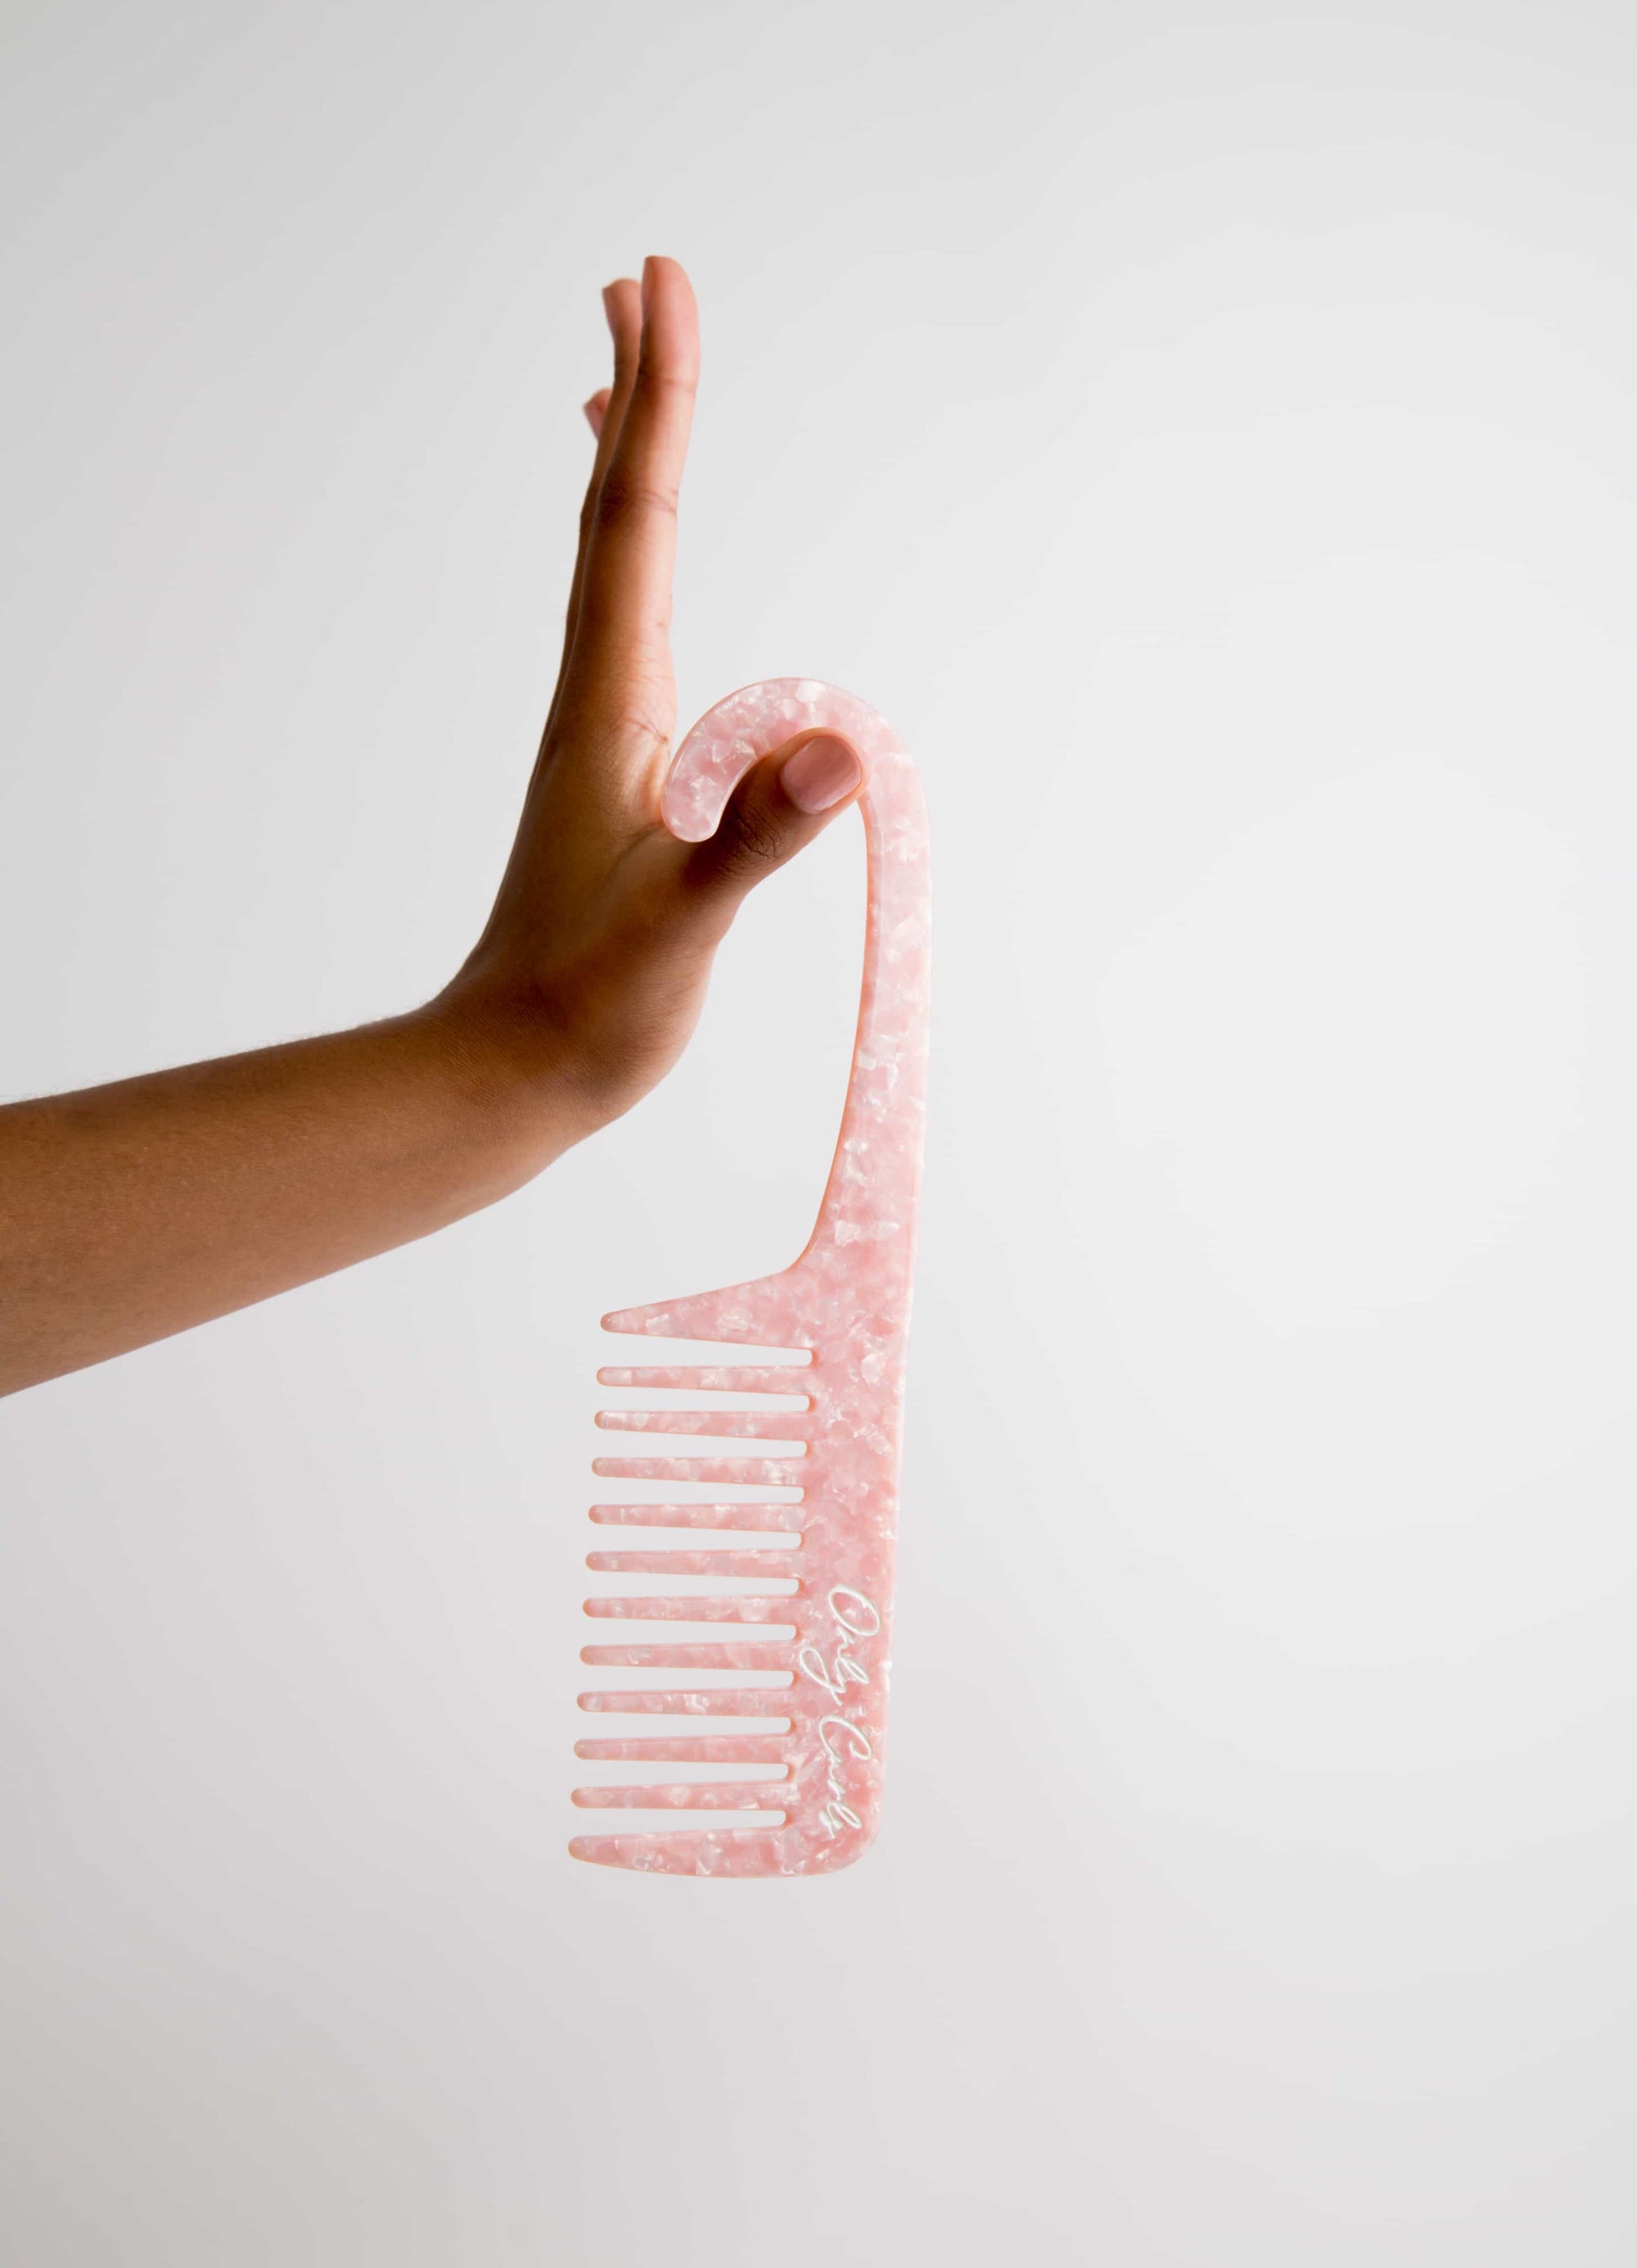 Only Curls Pink Shimmer Shower Comb - Only Curls